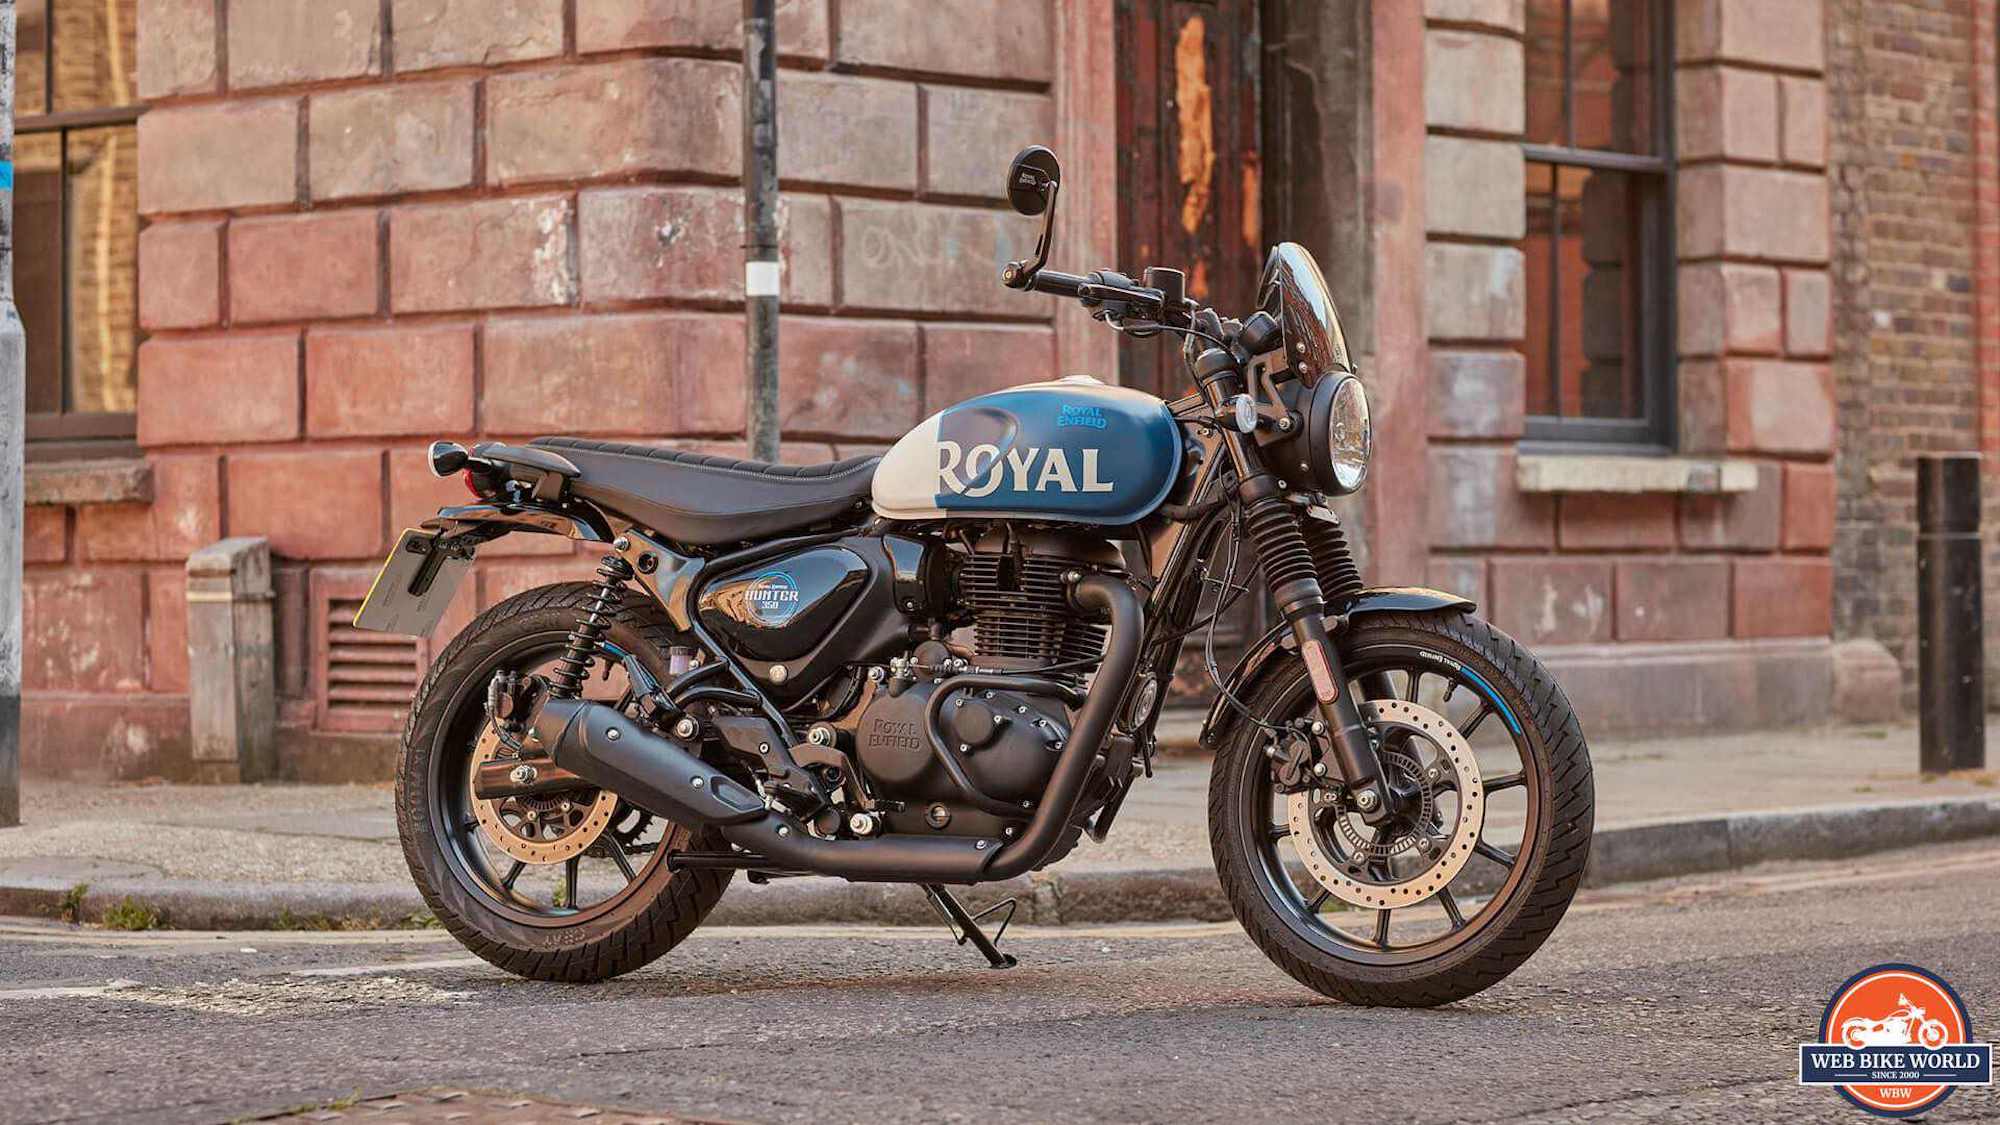 Royal Enfield's Hunter 350. Media sourced from our own review on the Royal Enfield Hunter 350. All rights reserved.